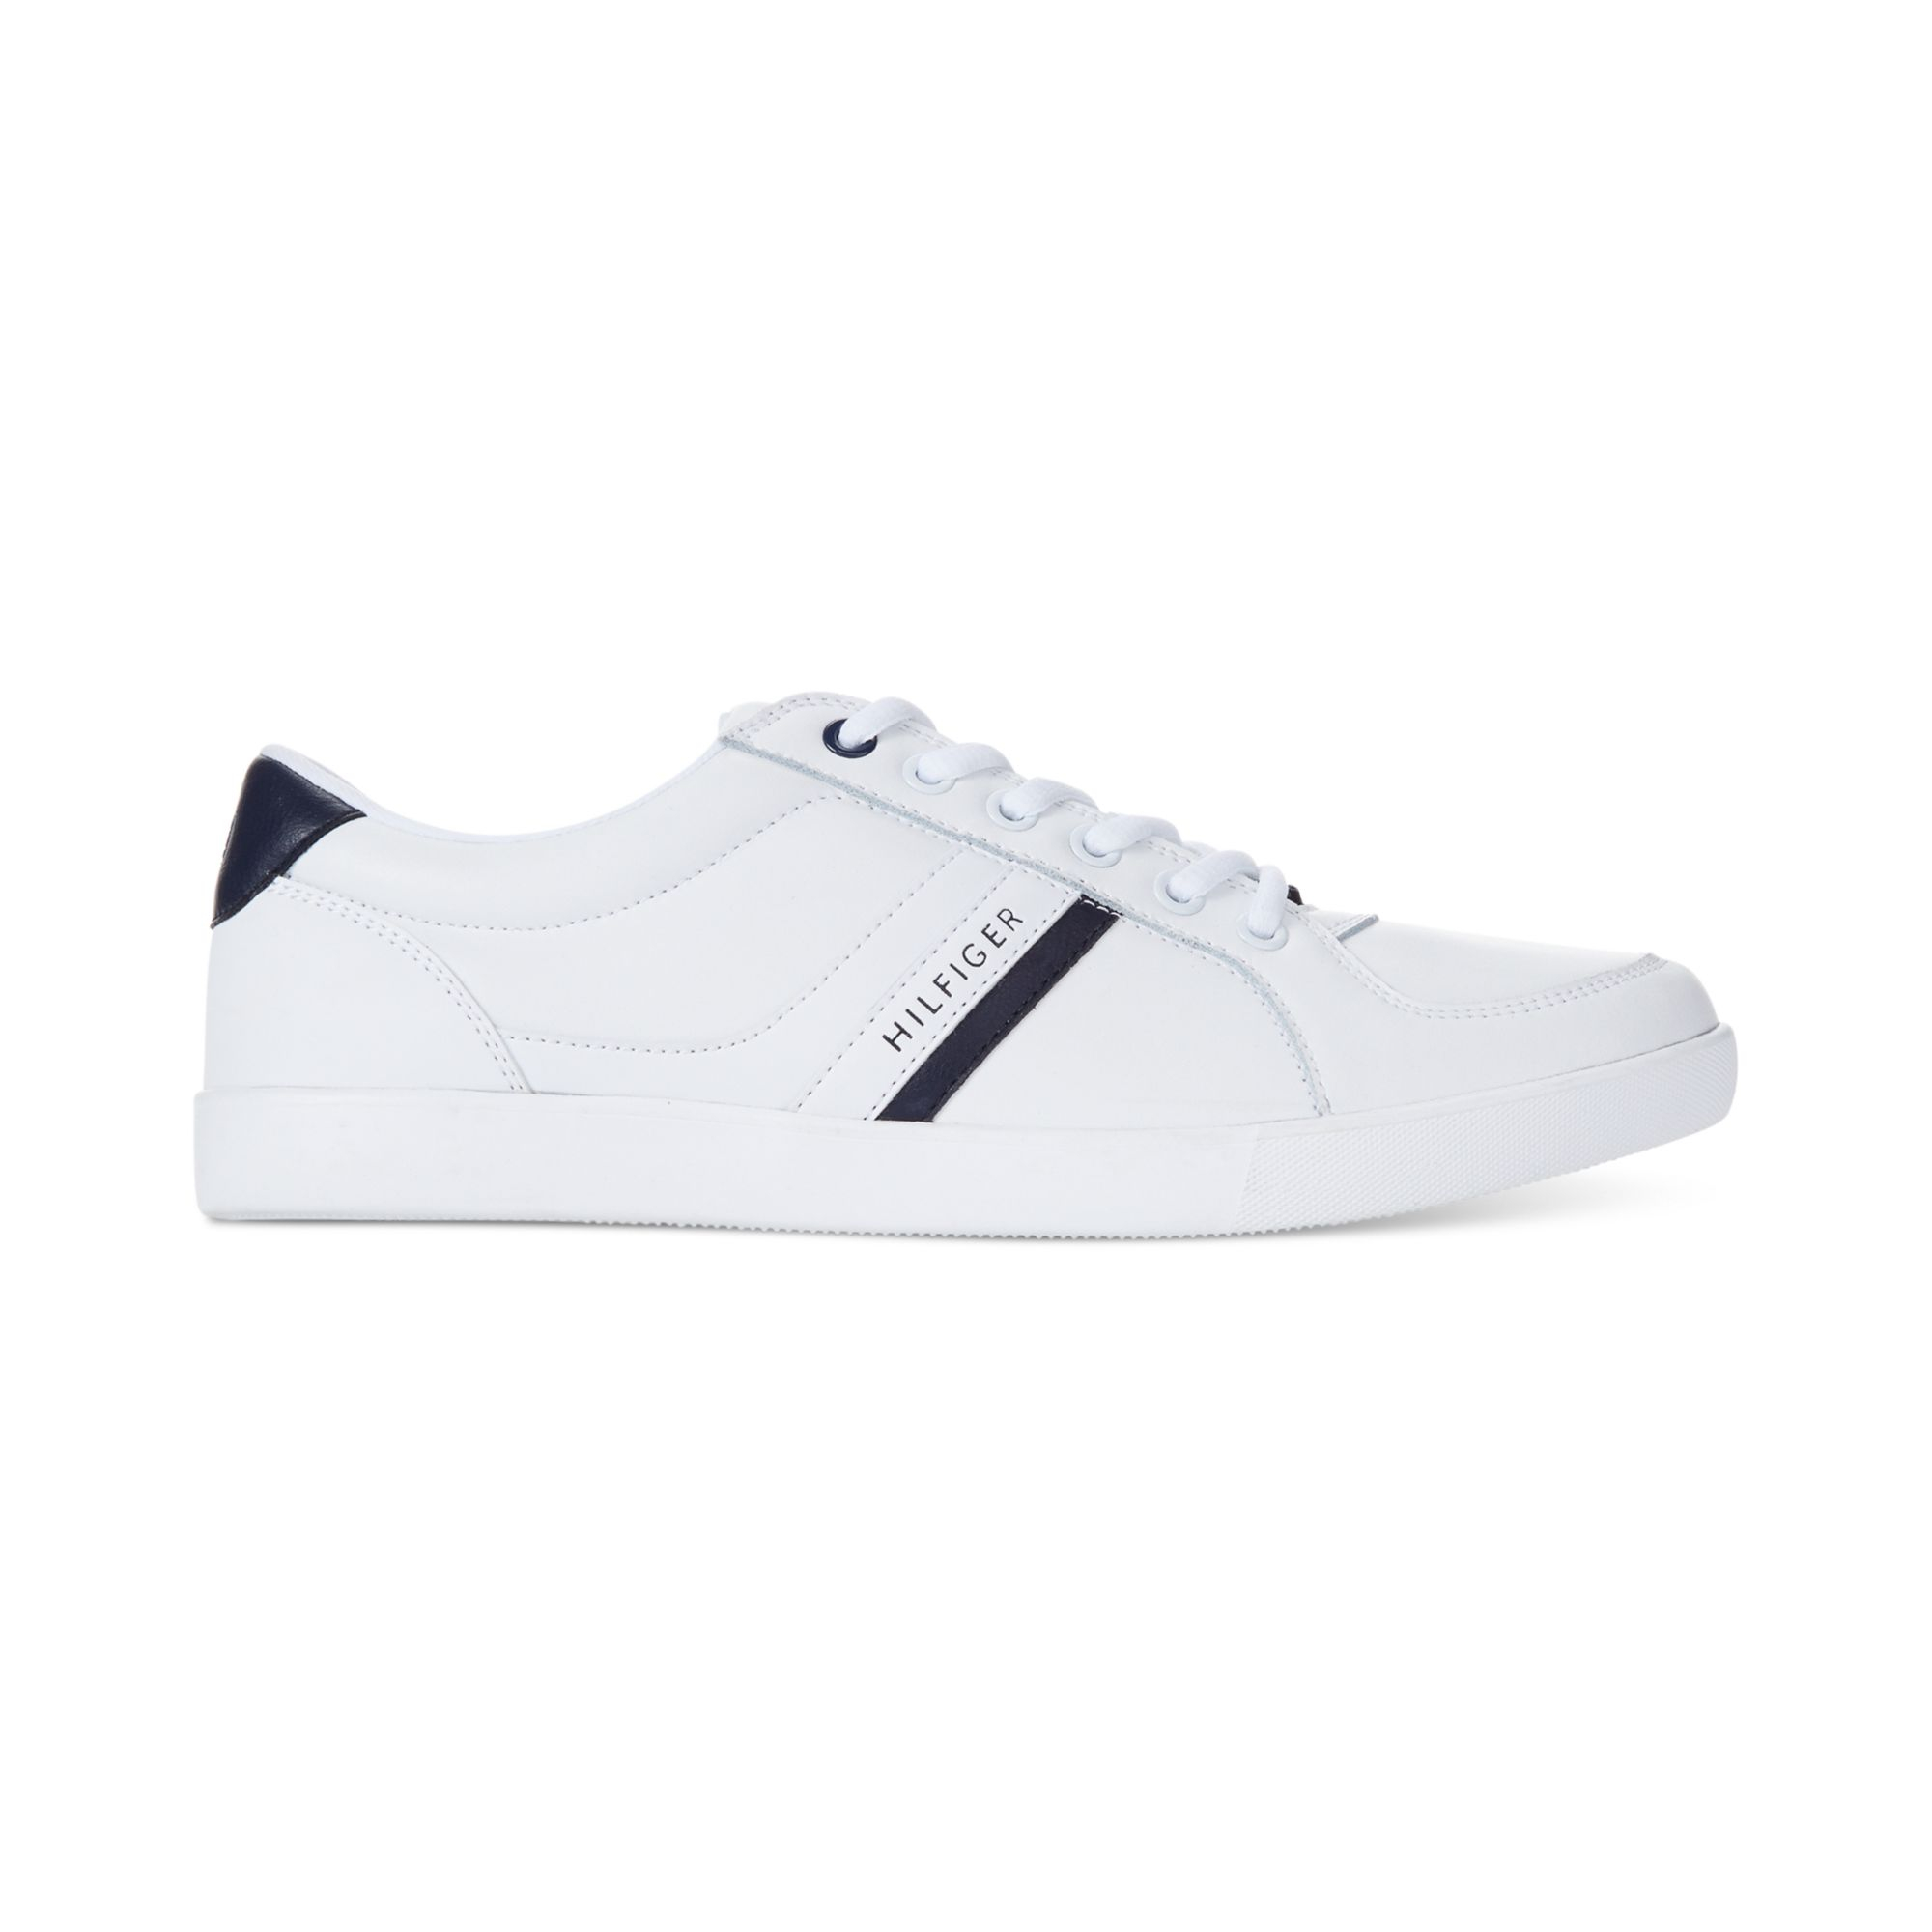 Tommy Hilfiger Thorne Sneakers in White for Men - Lyst